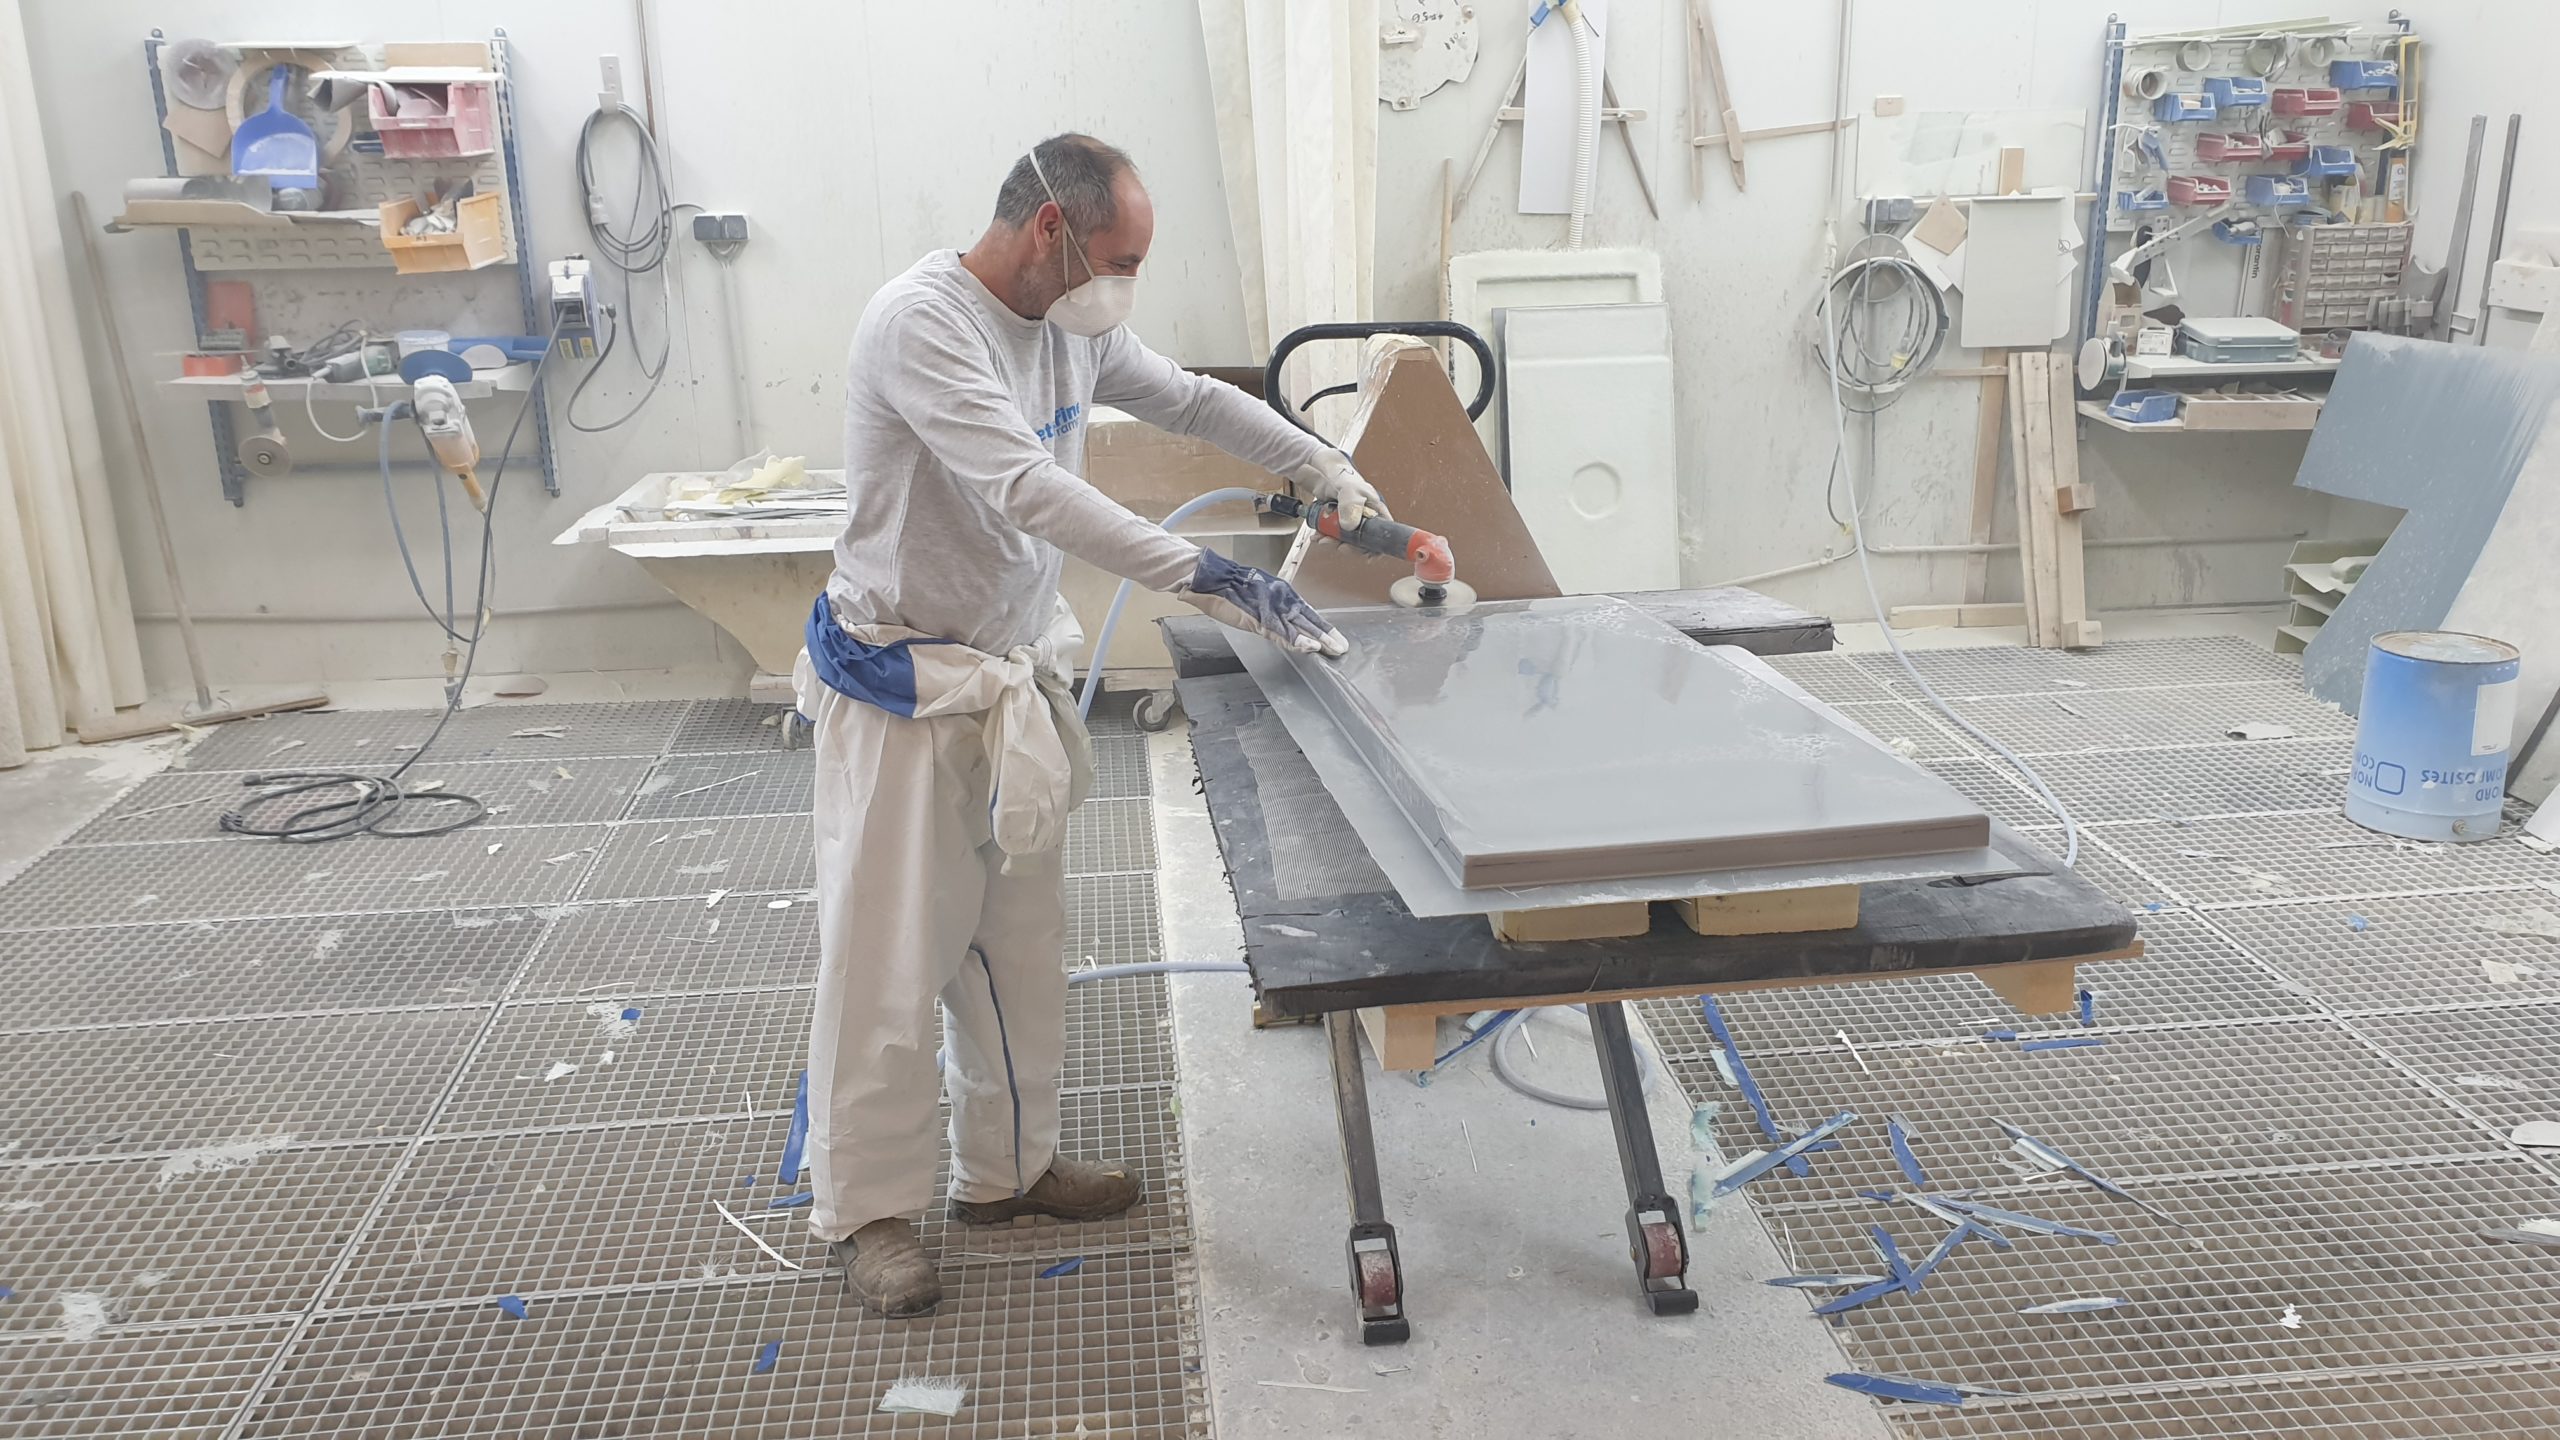 Cutting of the fibreglass ramp in our workshop